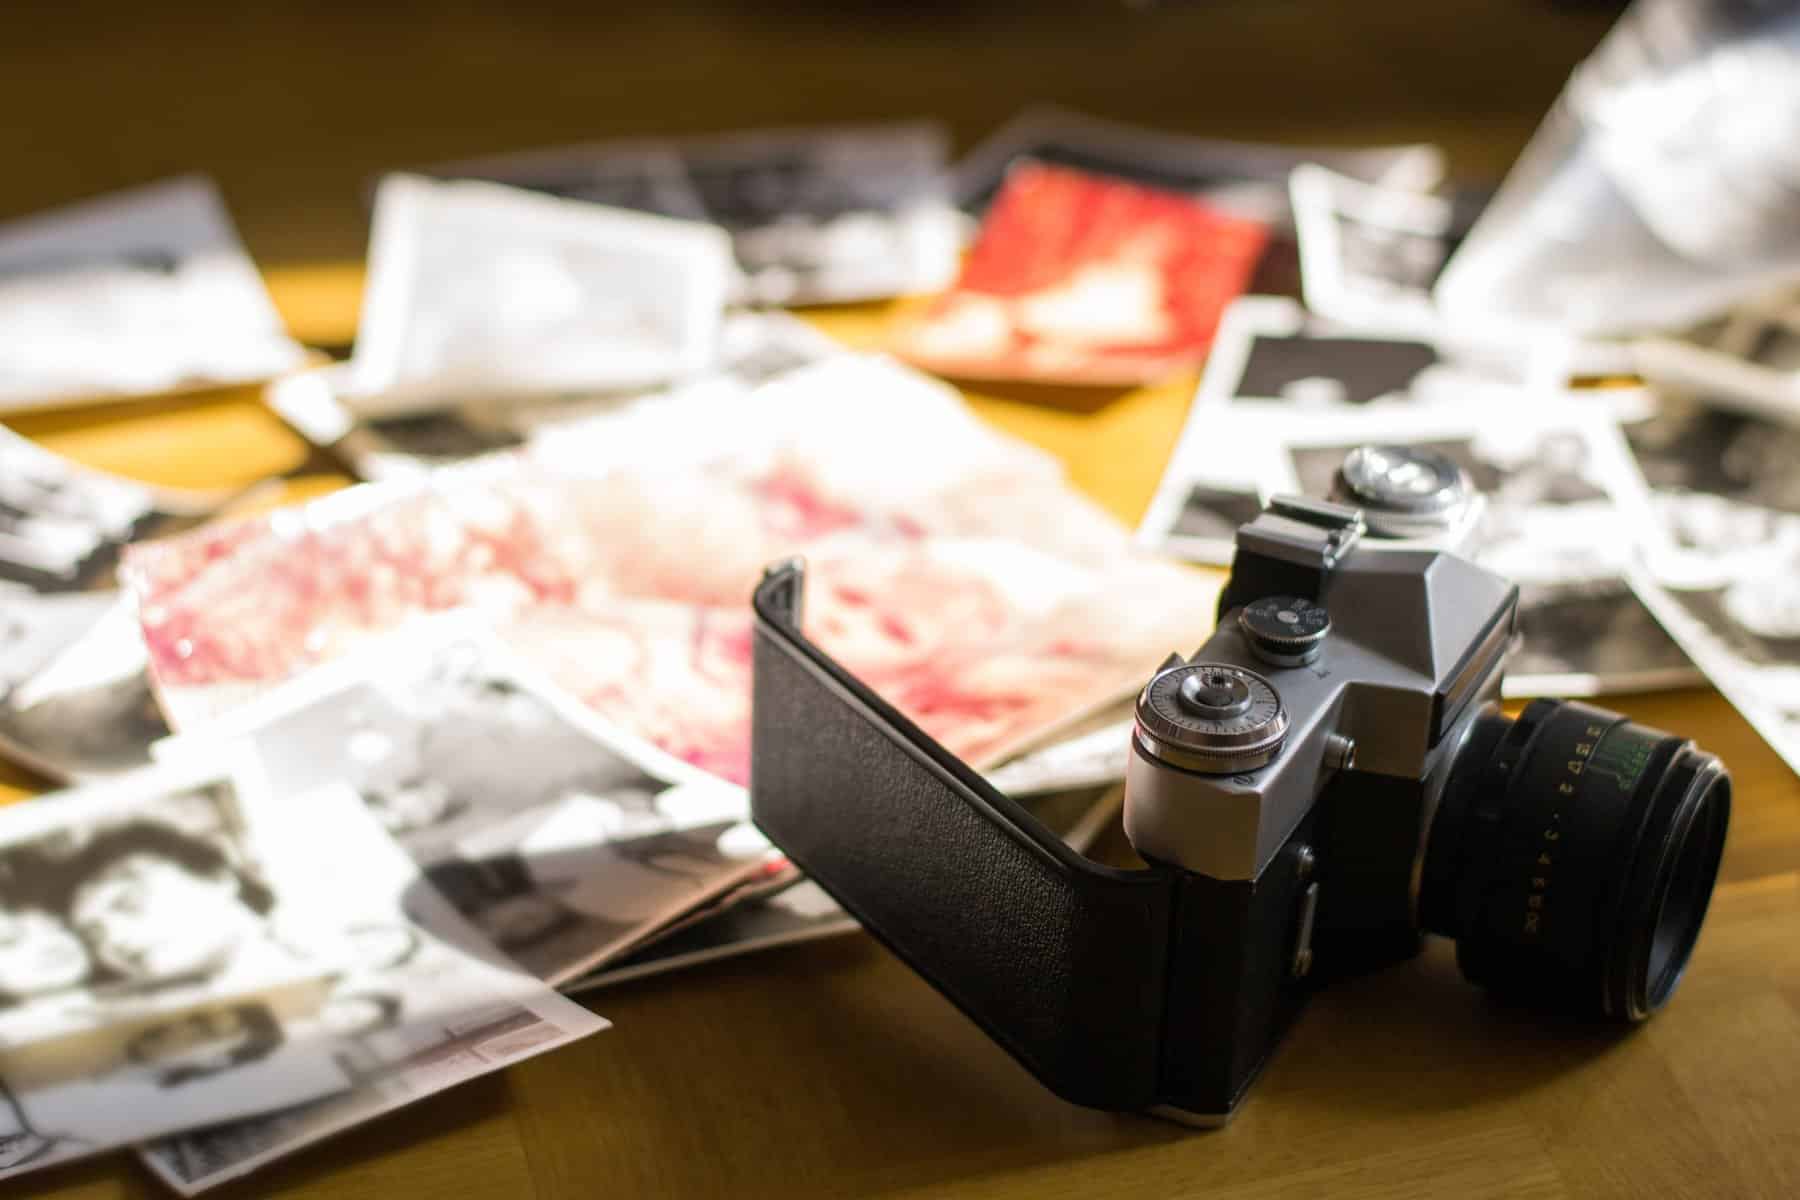 Vintage camera with scattered photographs on table.